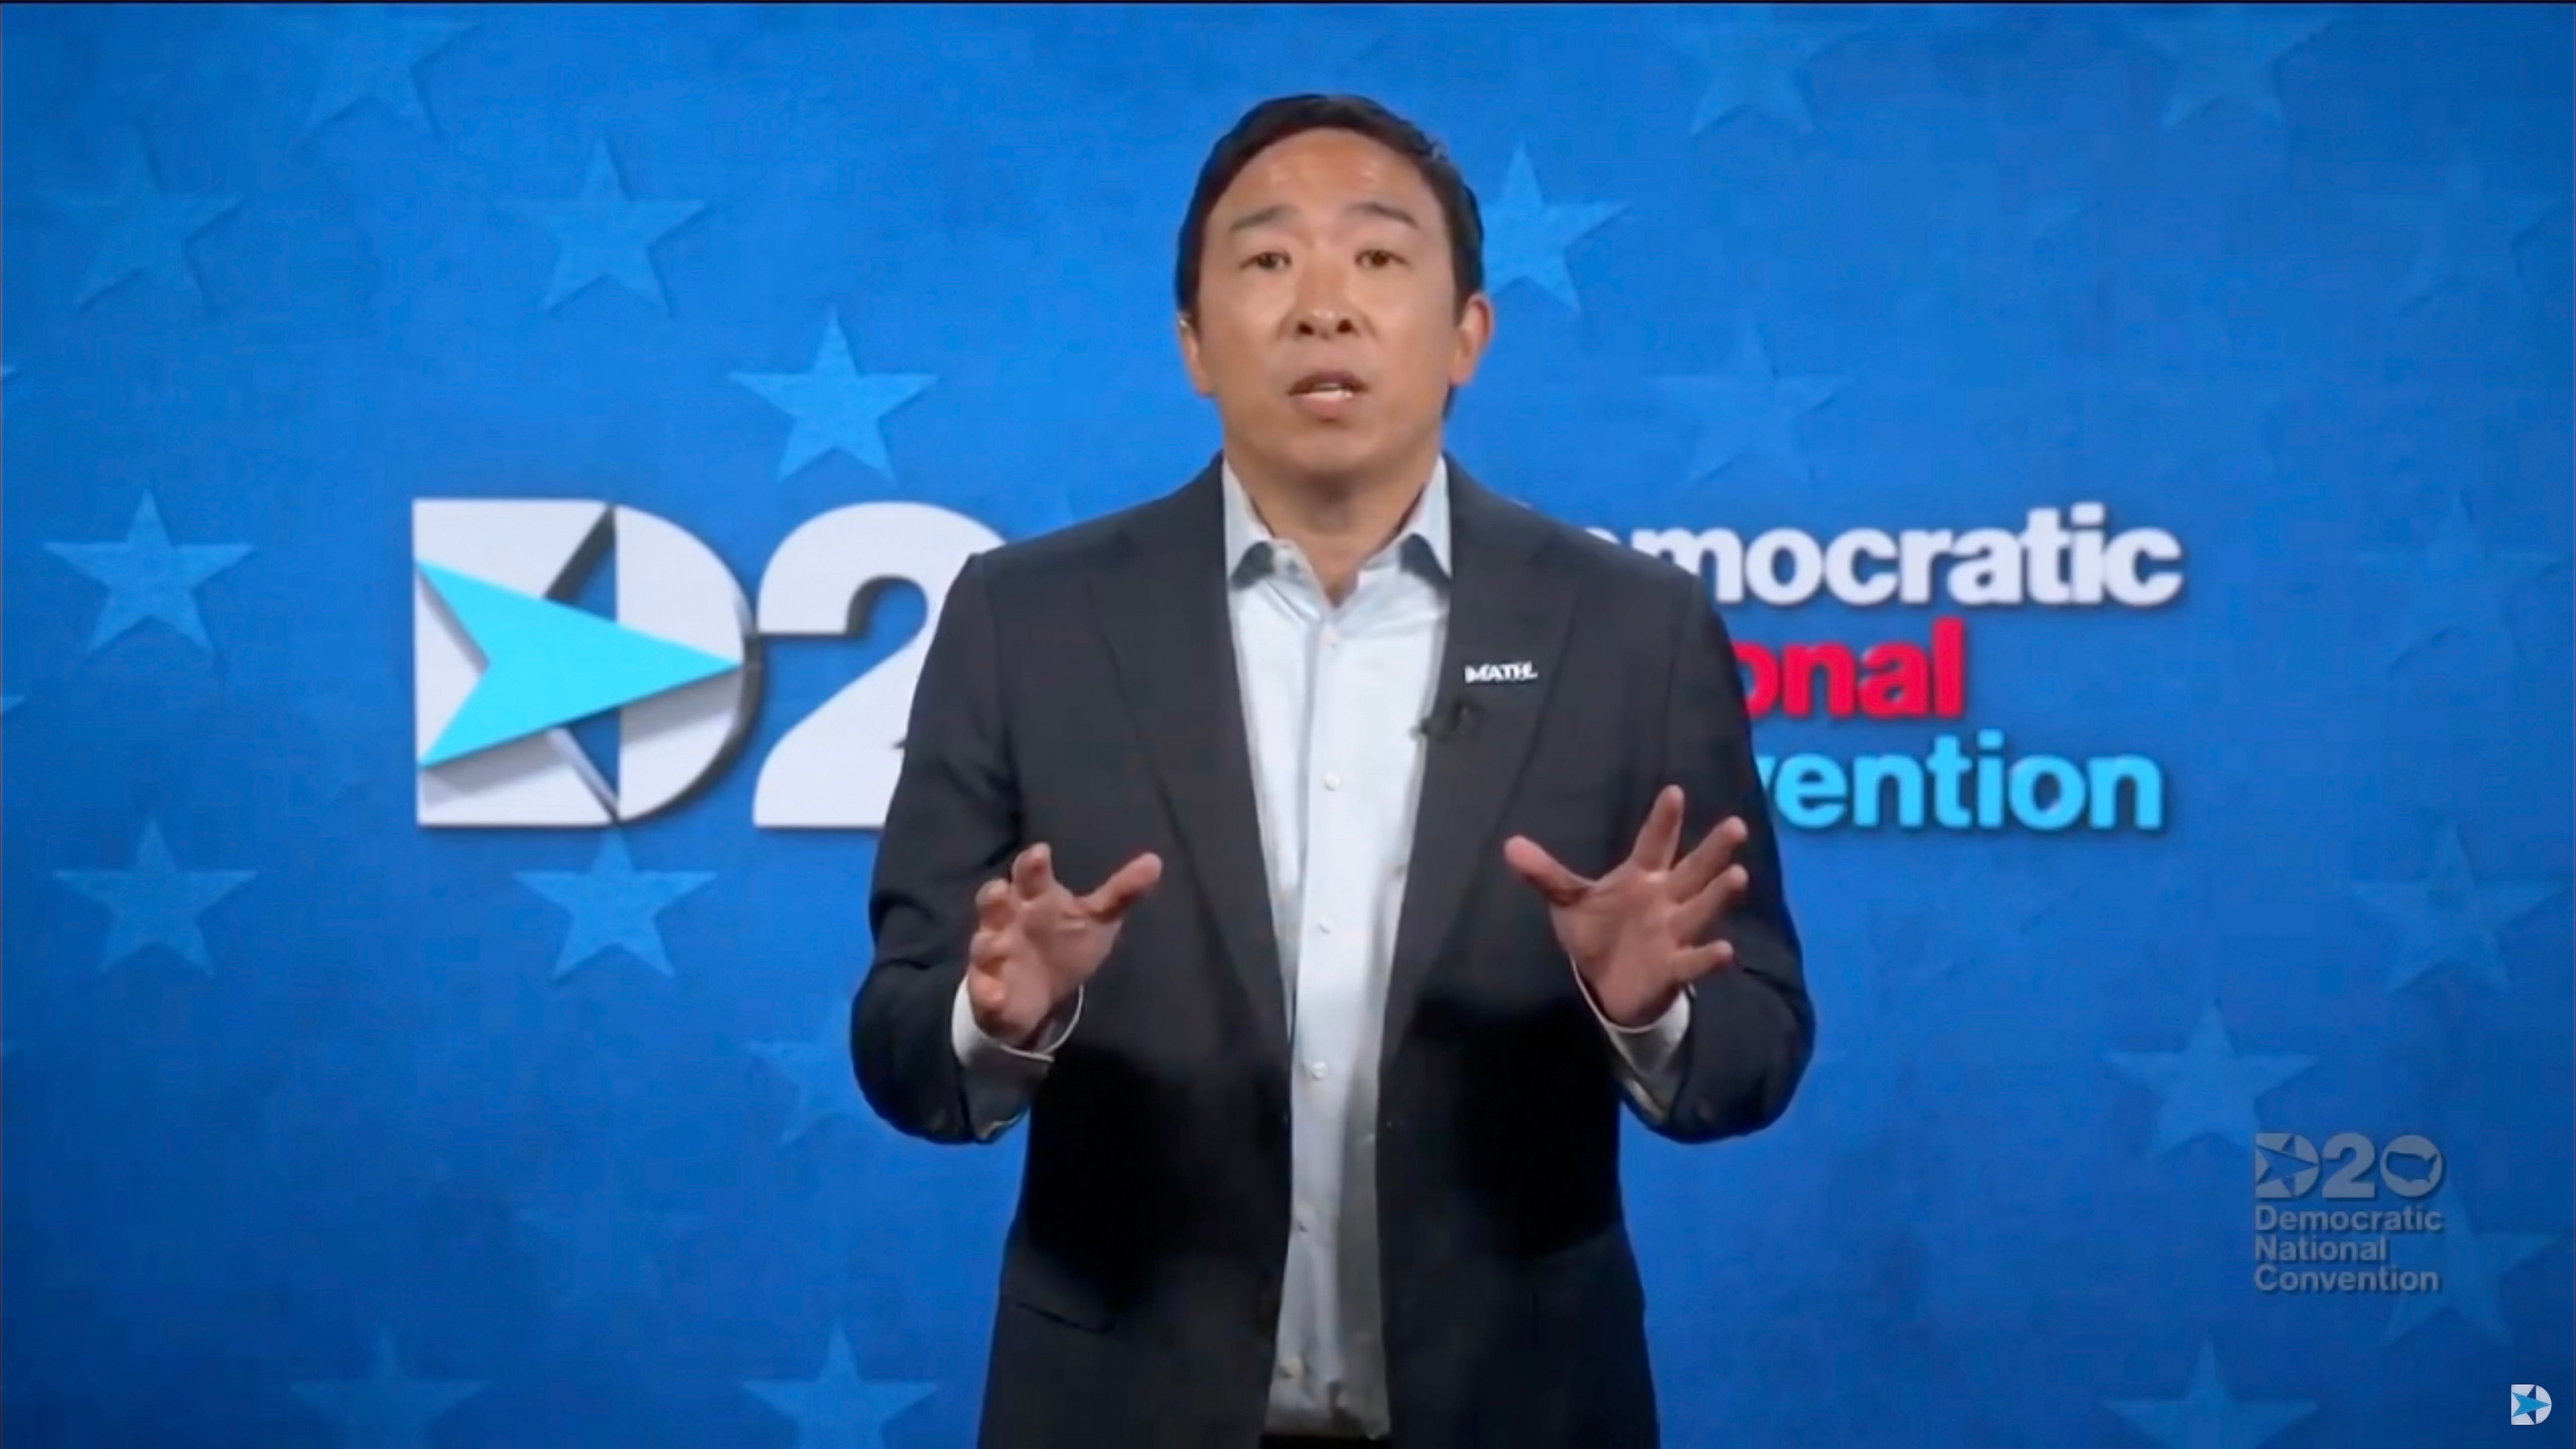 File Image: In this screenshot from the DNCC’s livestream of the 2020 Democratic National Convention, businessman Andrew Yang addresses the virtual convention on 20 August 2020.&nbsp;